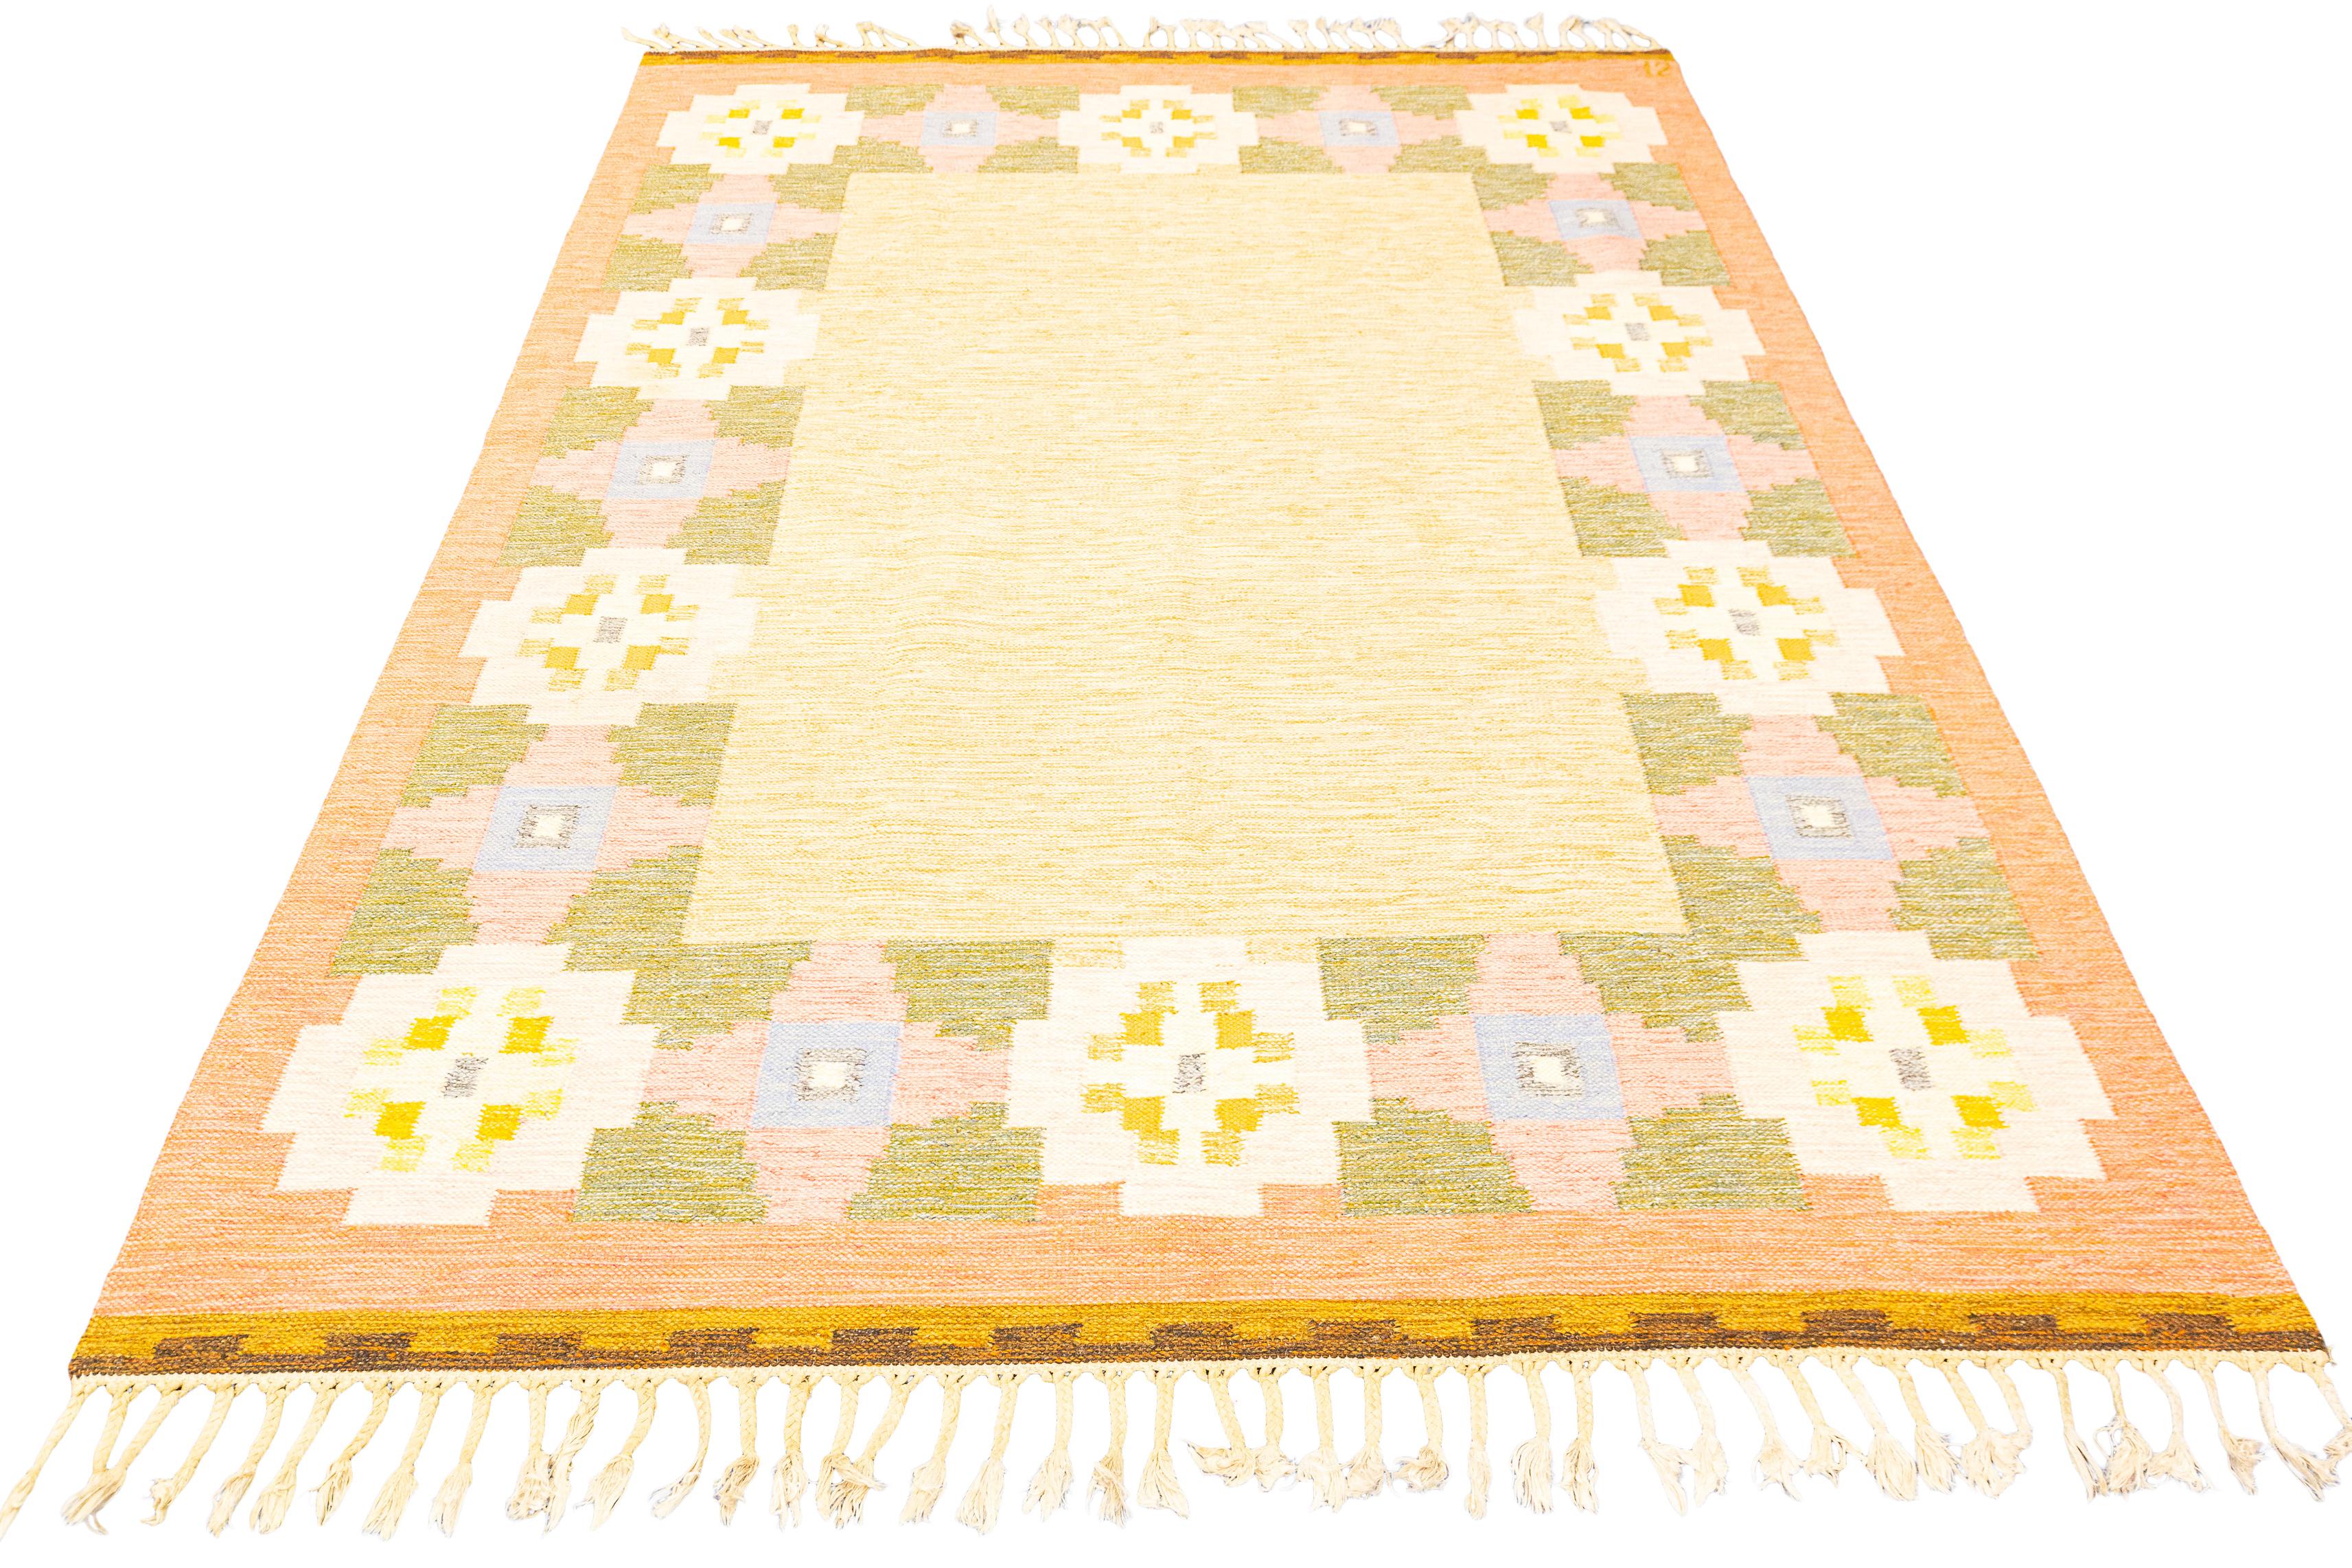 This is a Scandinavian Rug Flat-weave, often referred to as a 